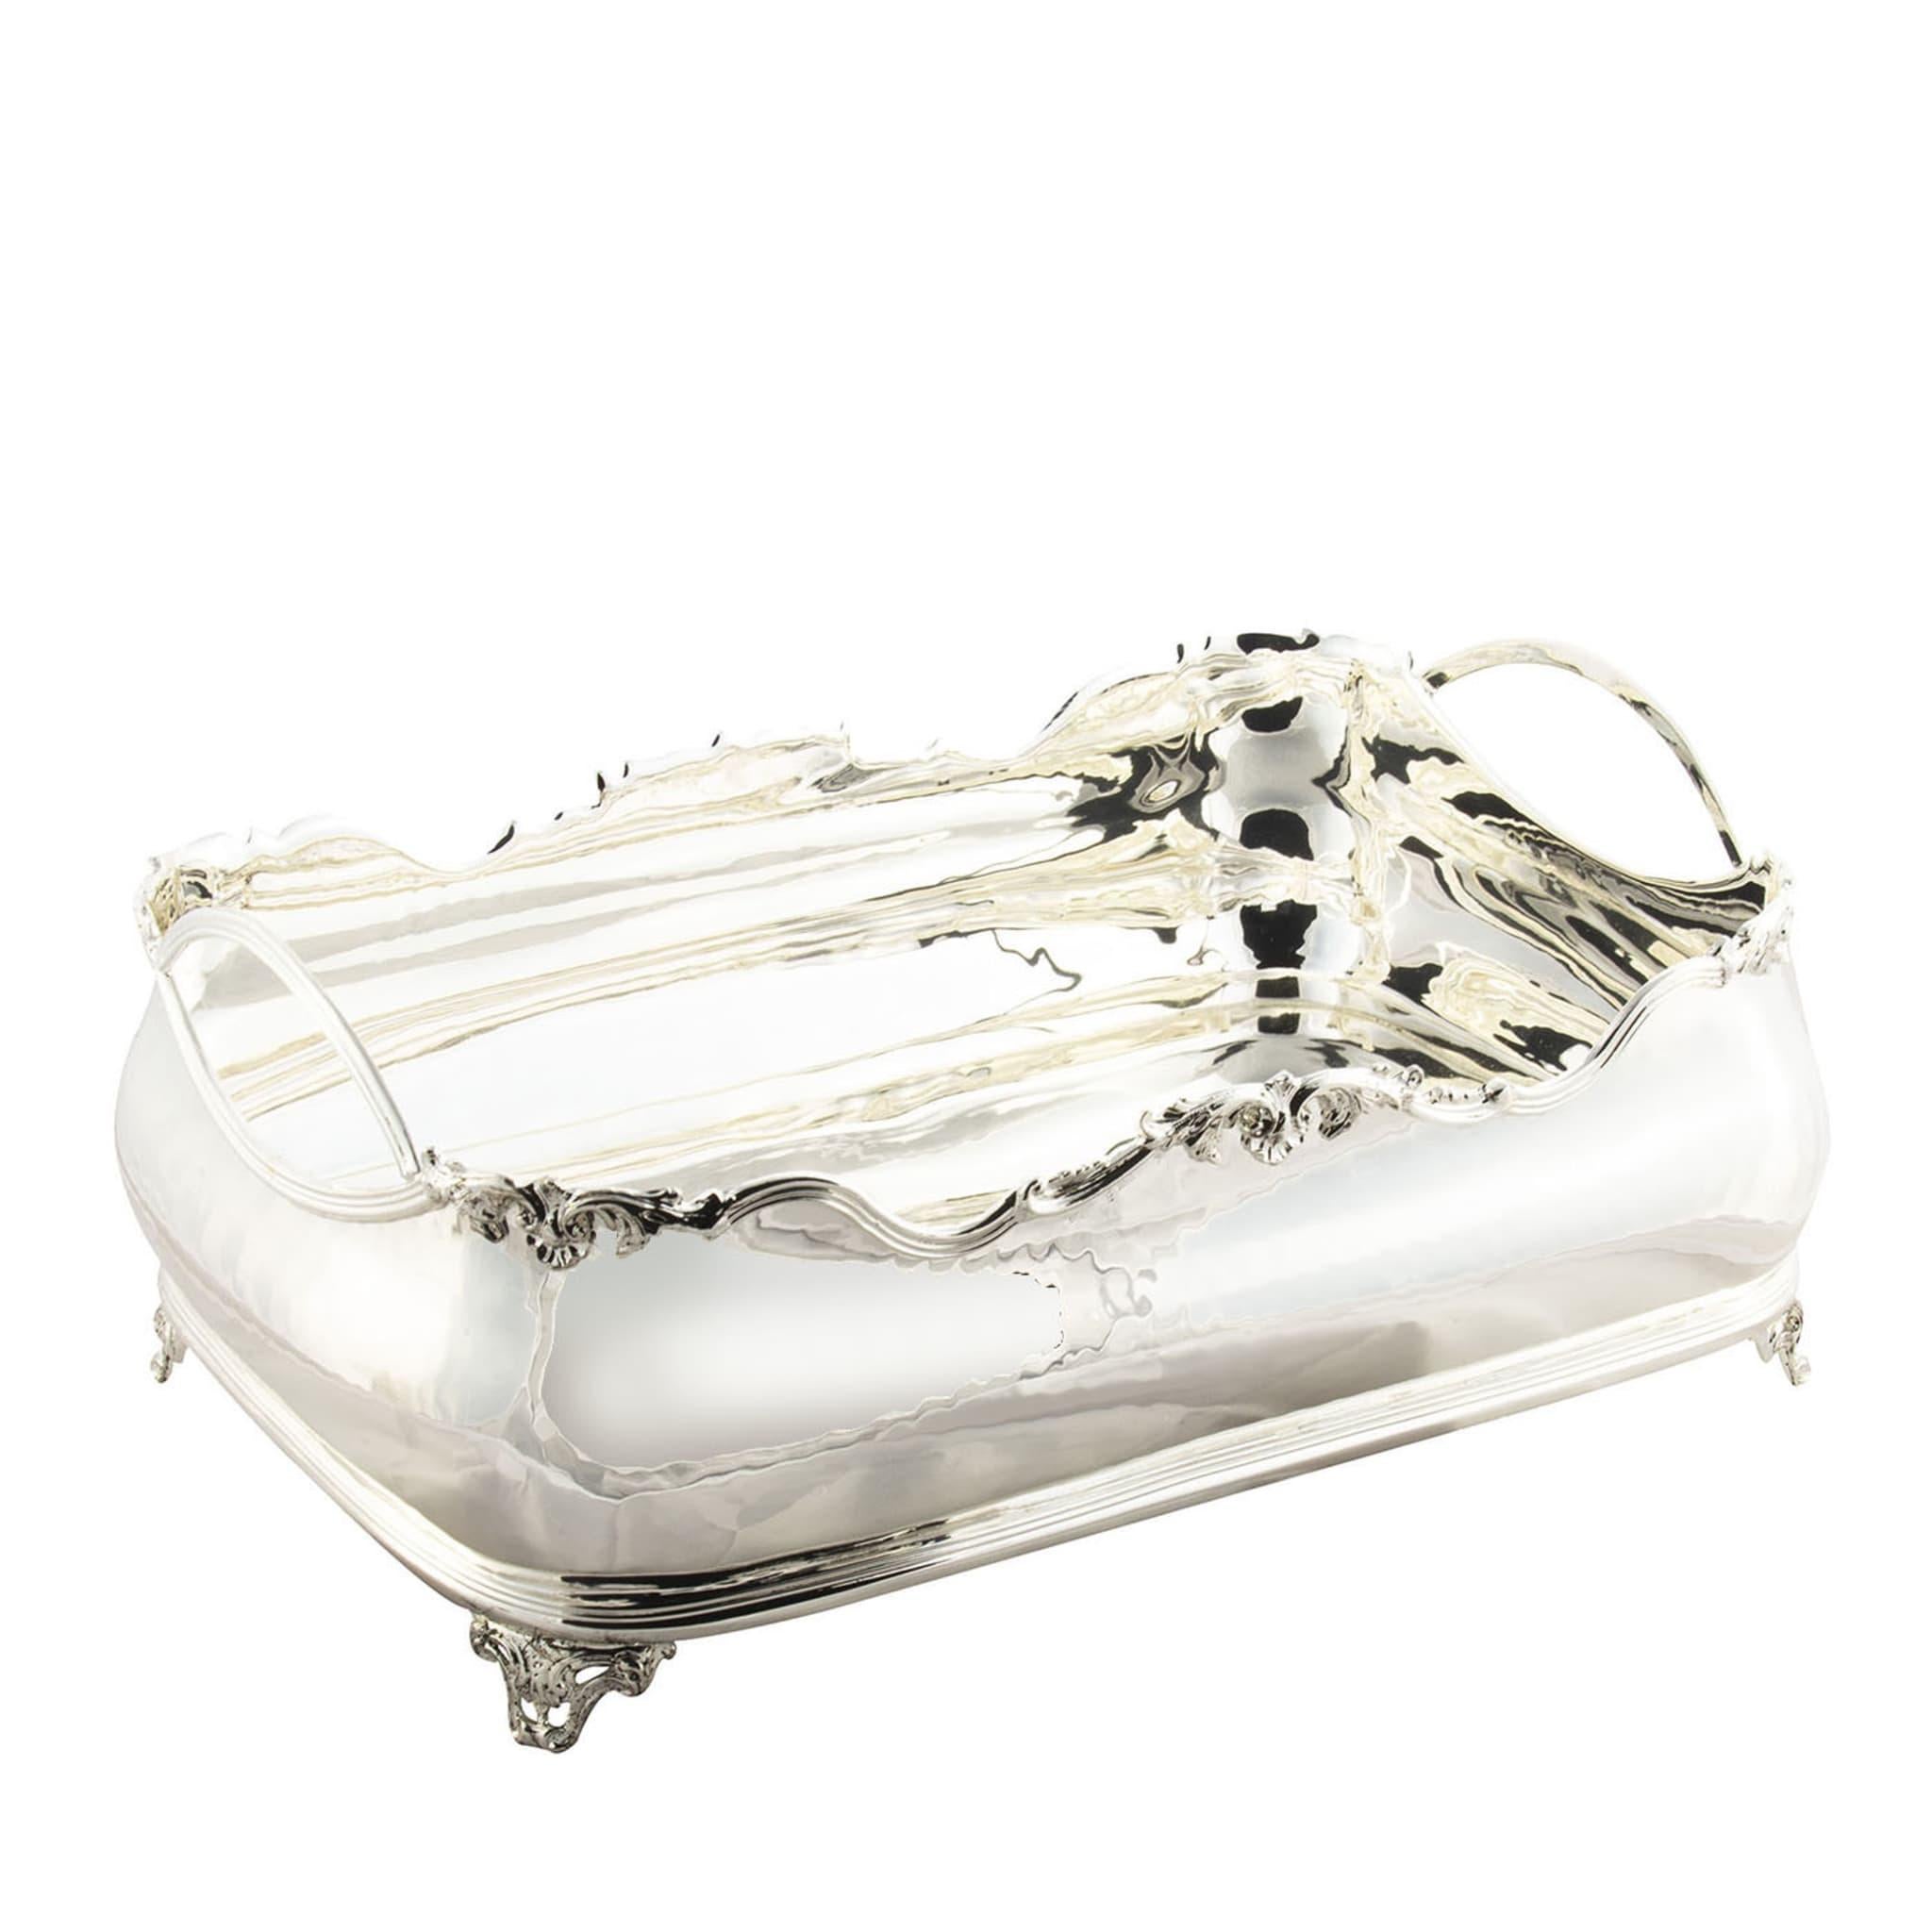 Classic-Style Rectangular Footed Silver Centerpiece Bowl